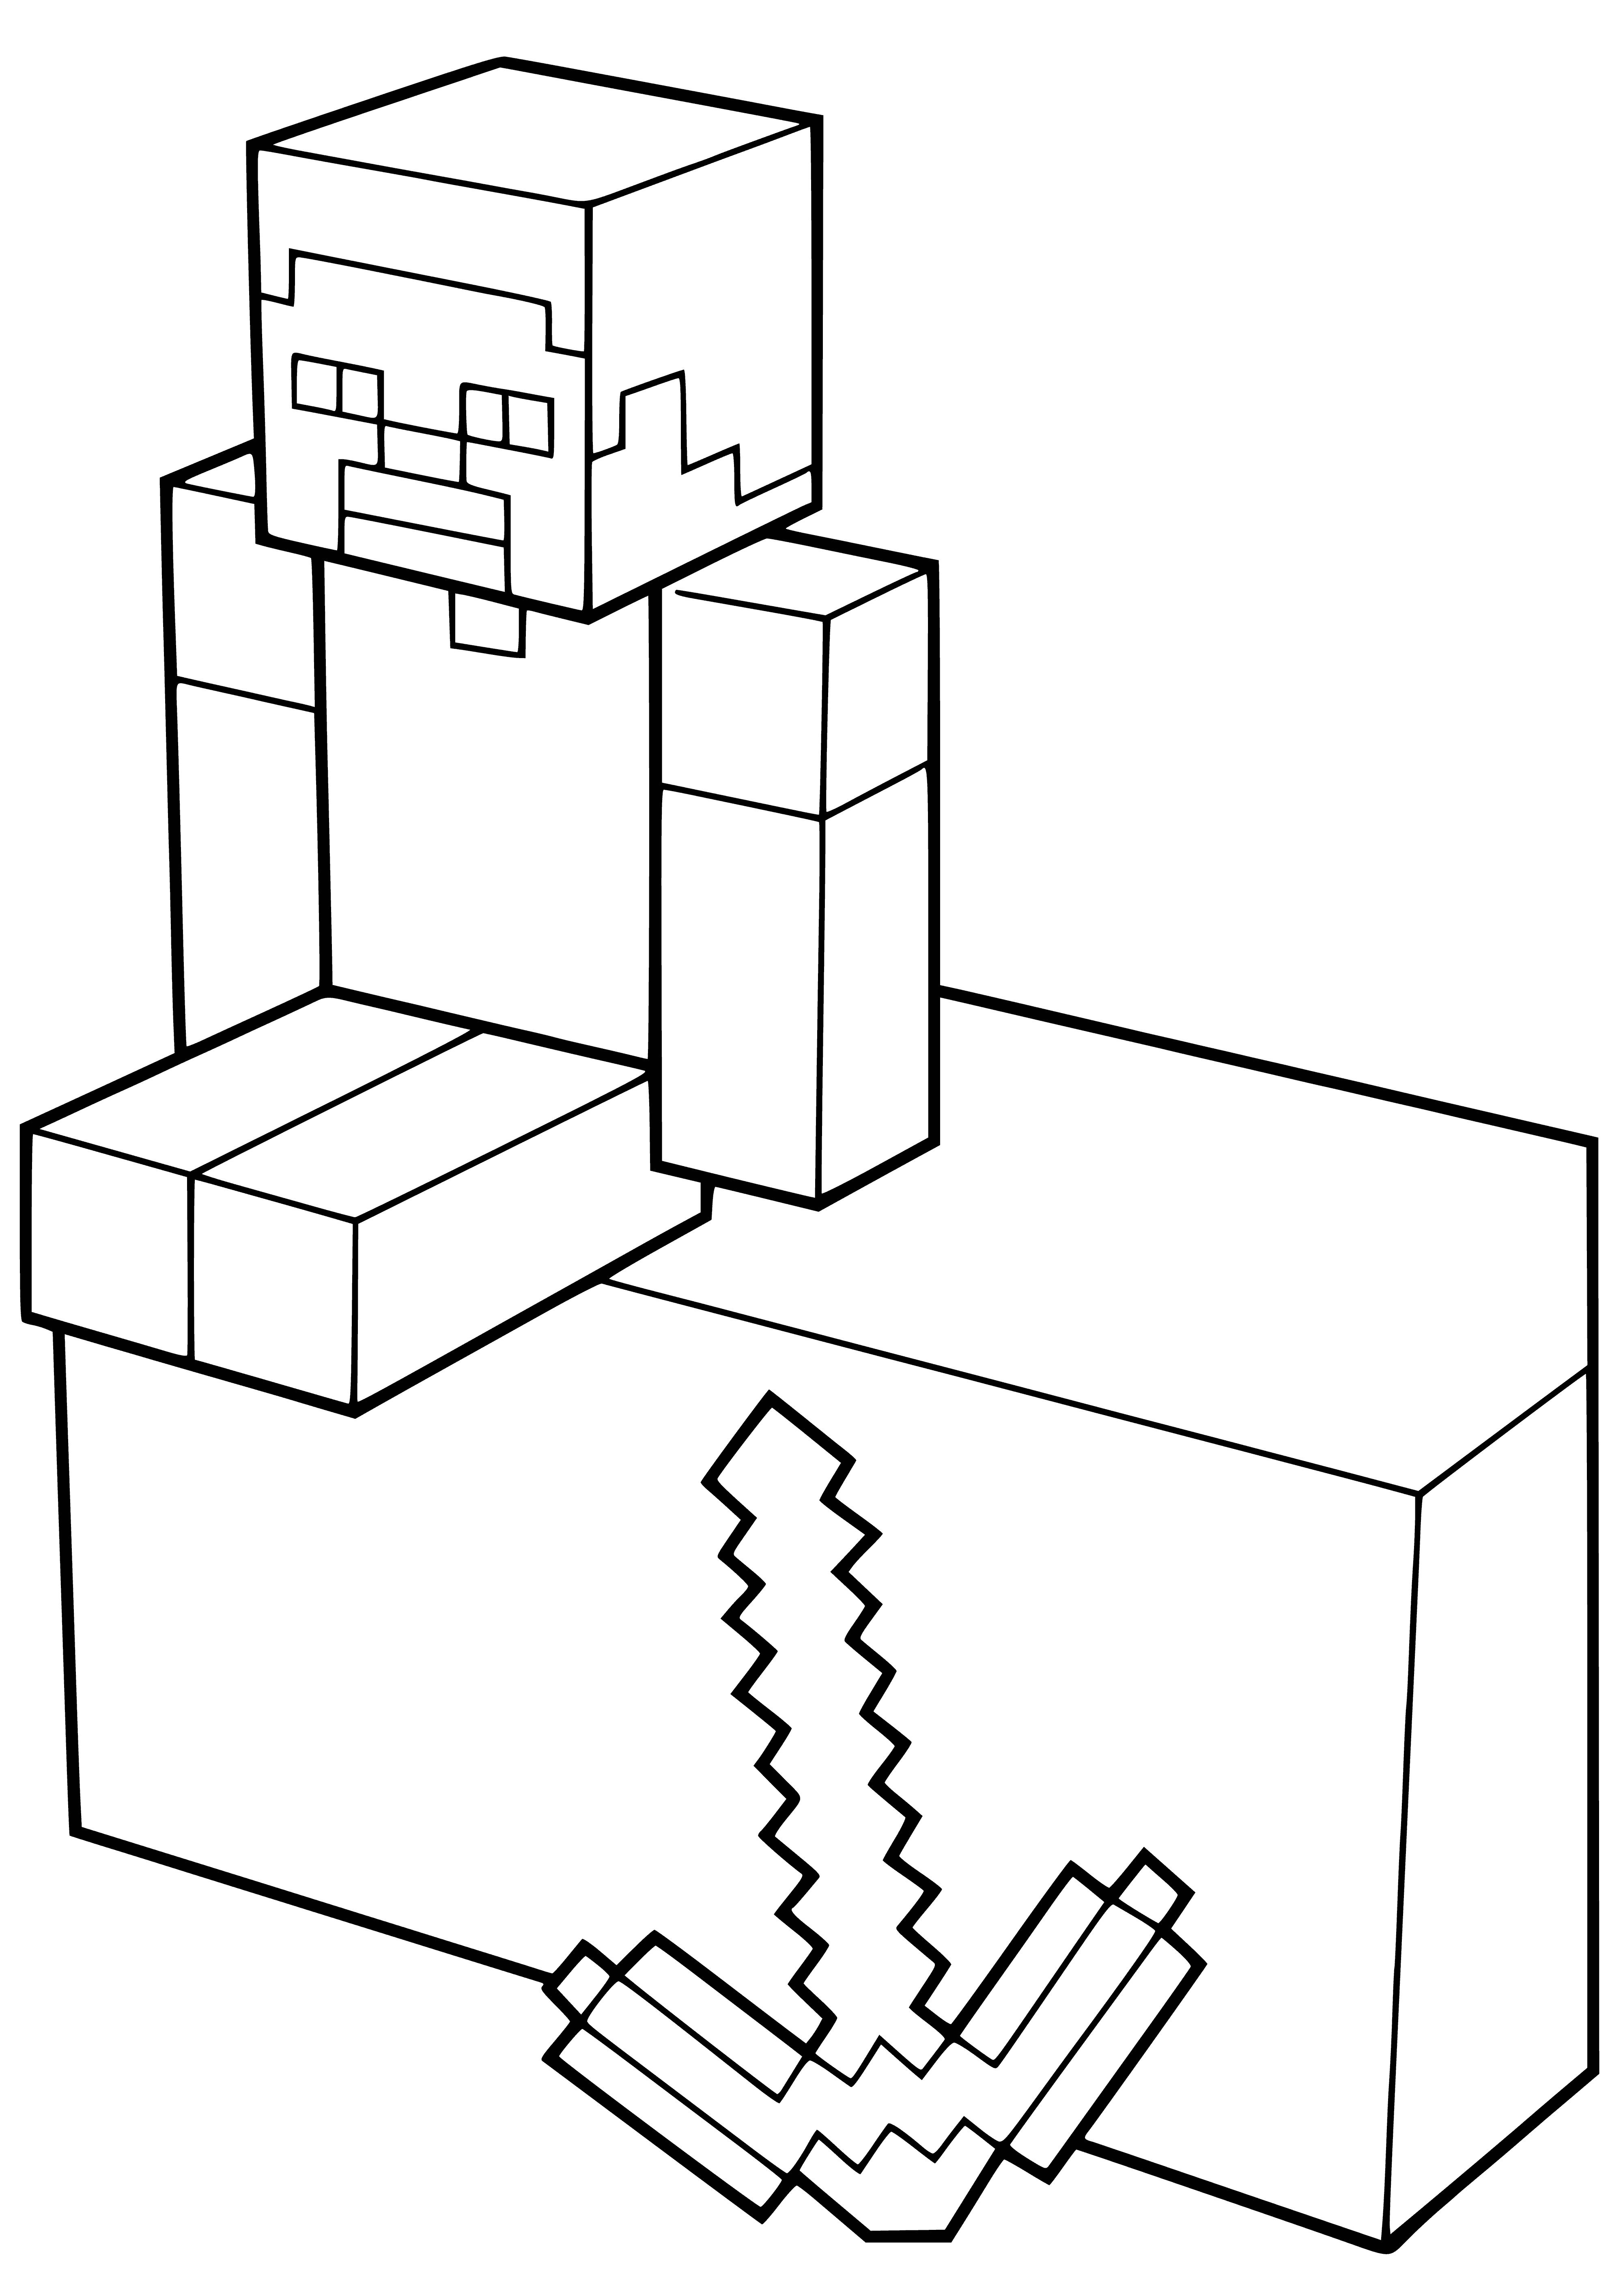 coloring page: Minecraft player uses pickaxe to mine block of stone in front of them. Surrounded by other blocks of stone.